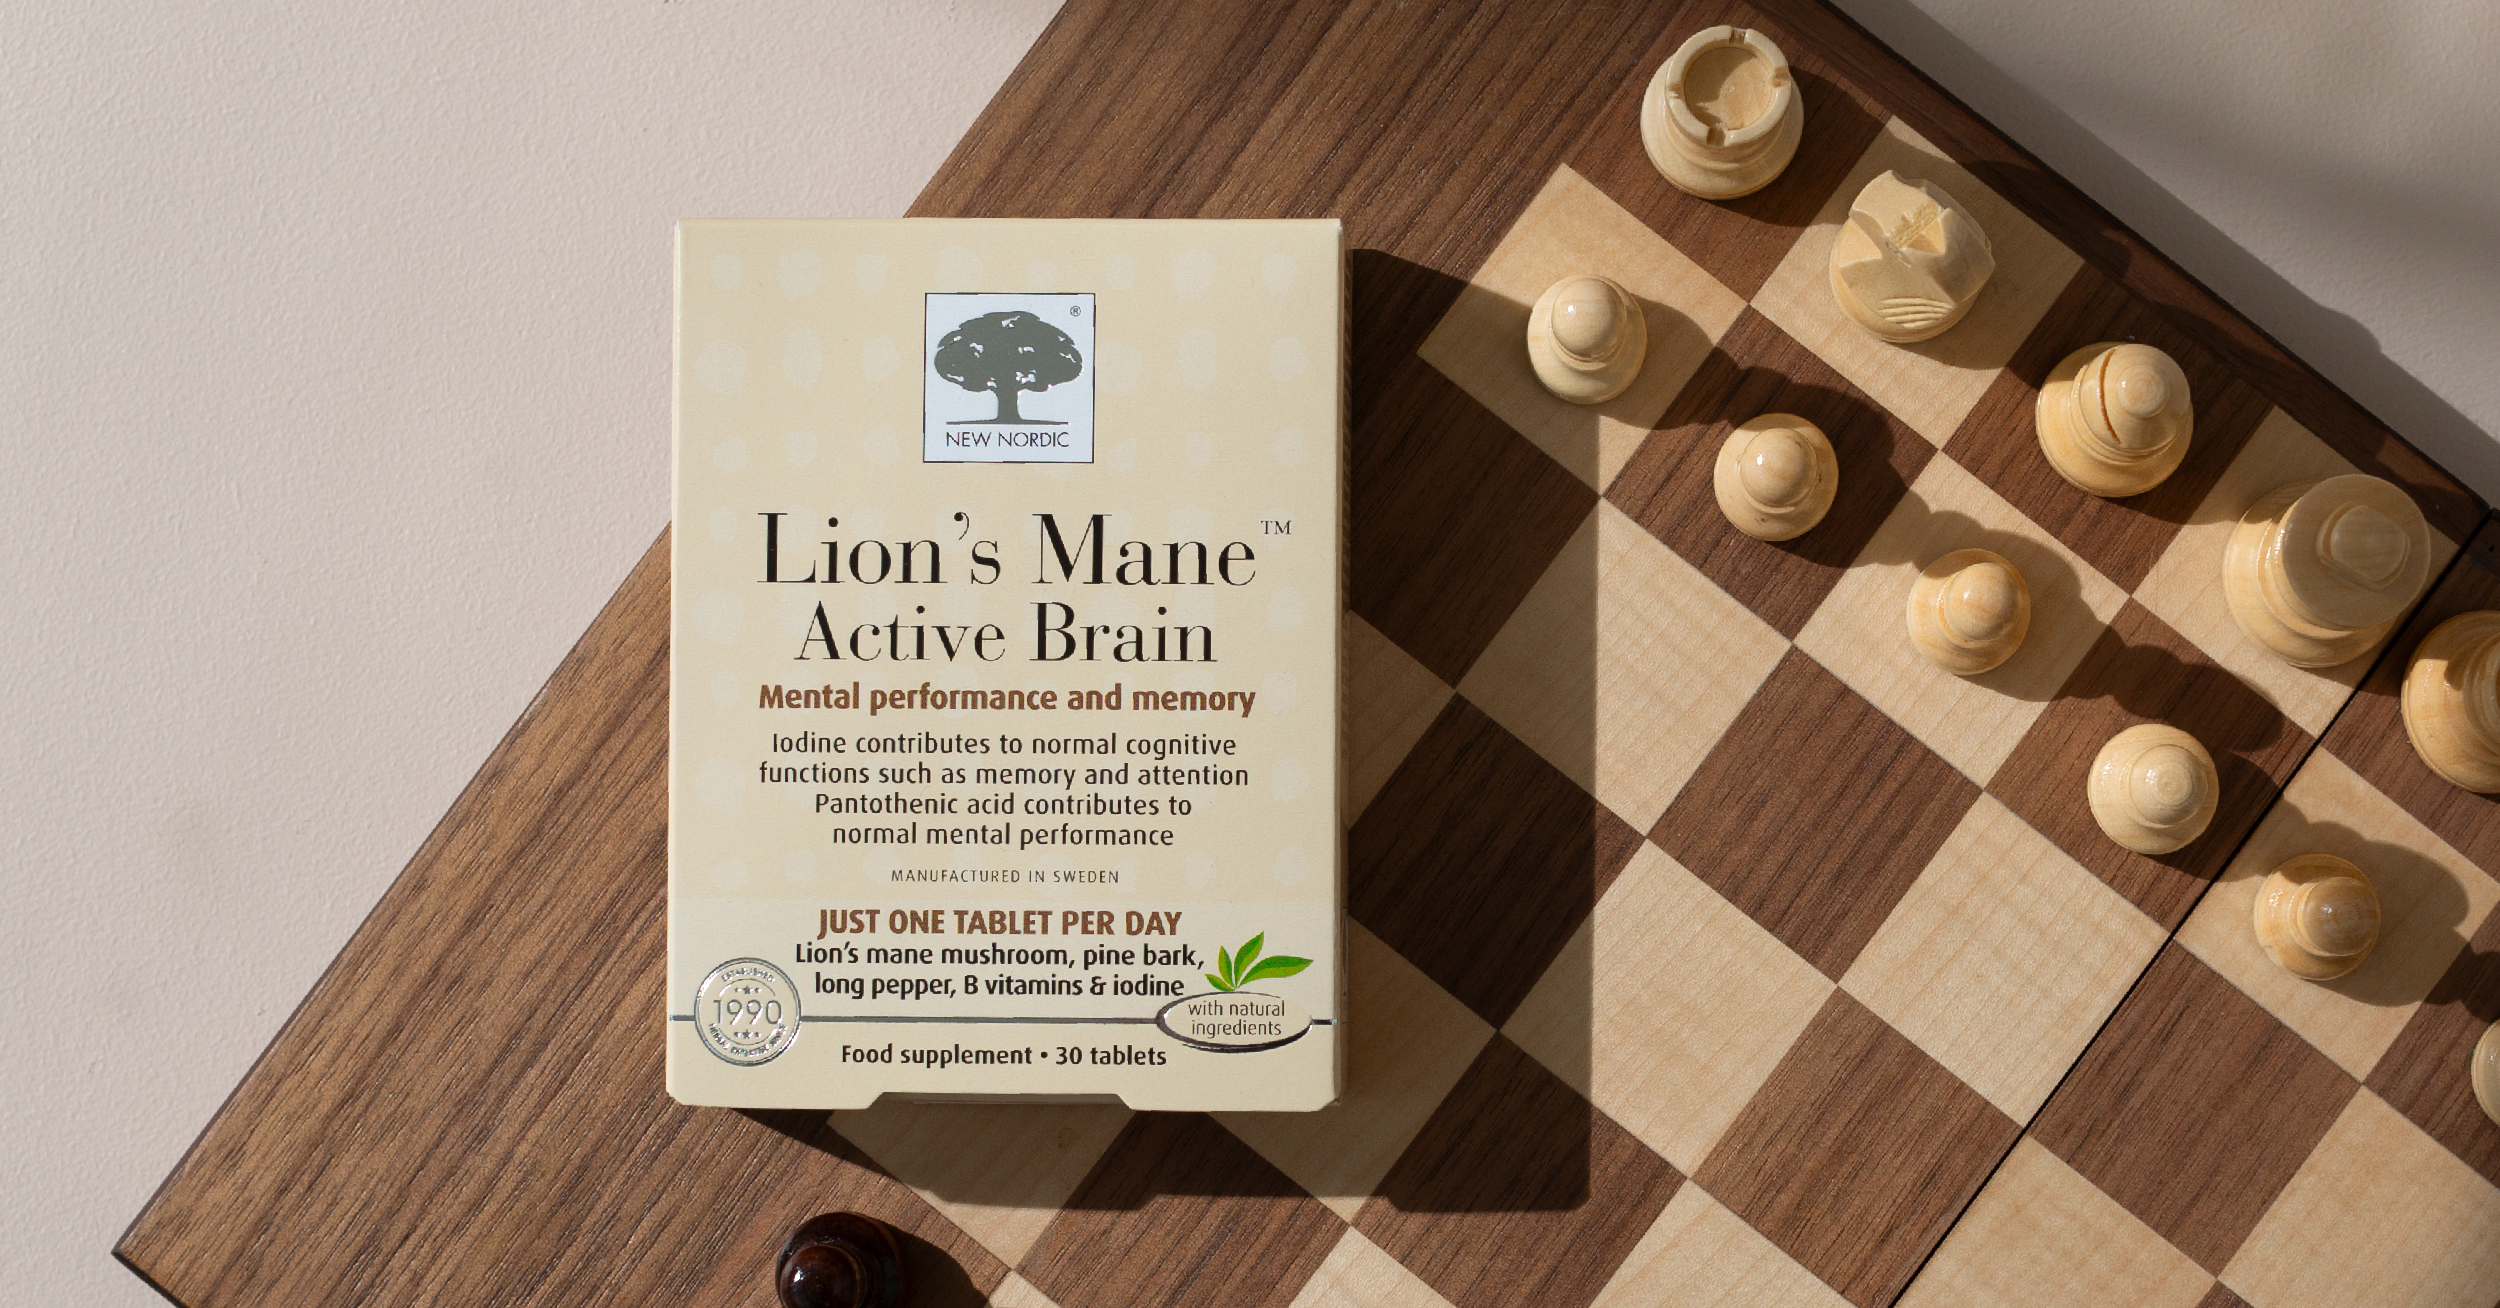 Support your brain with Lion's Mane extract, panthotenic acid and iodine